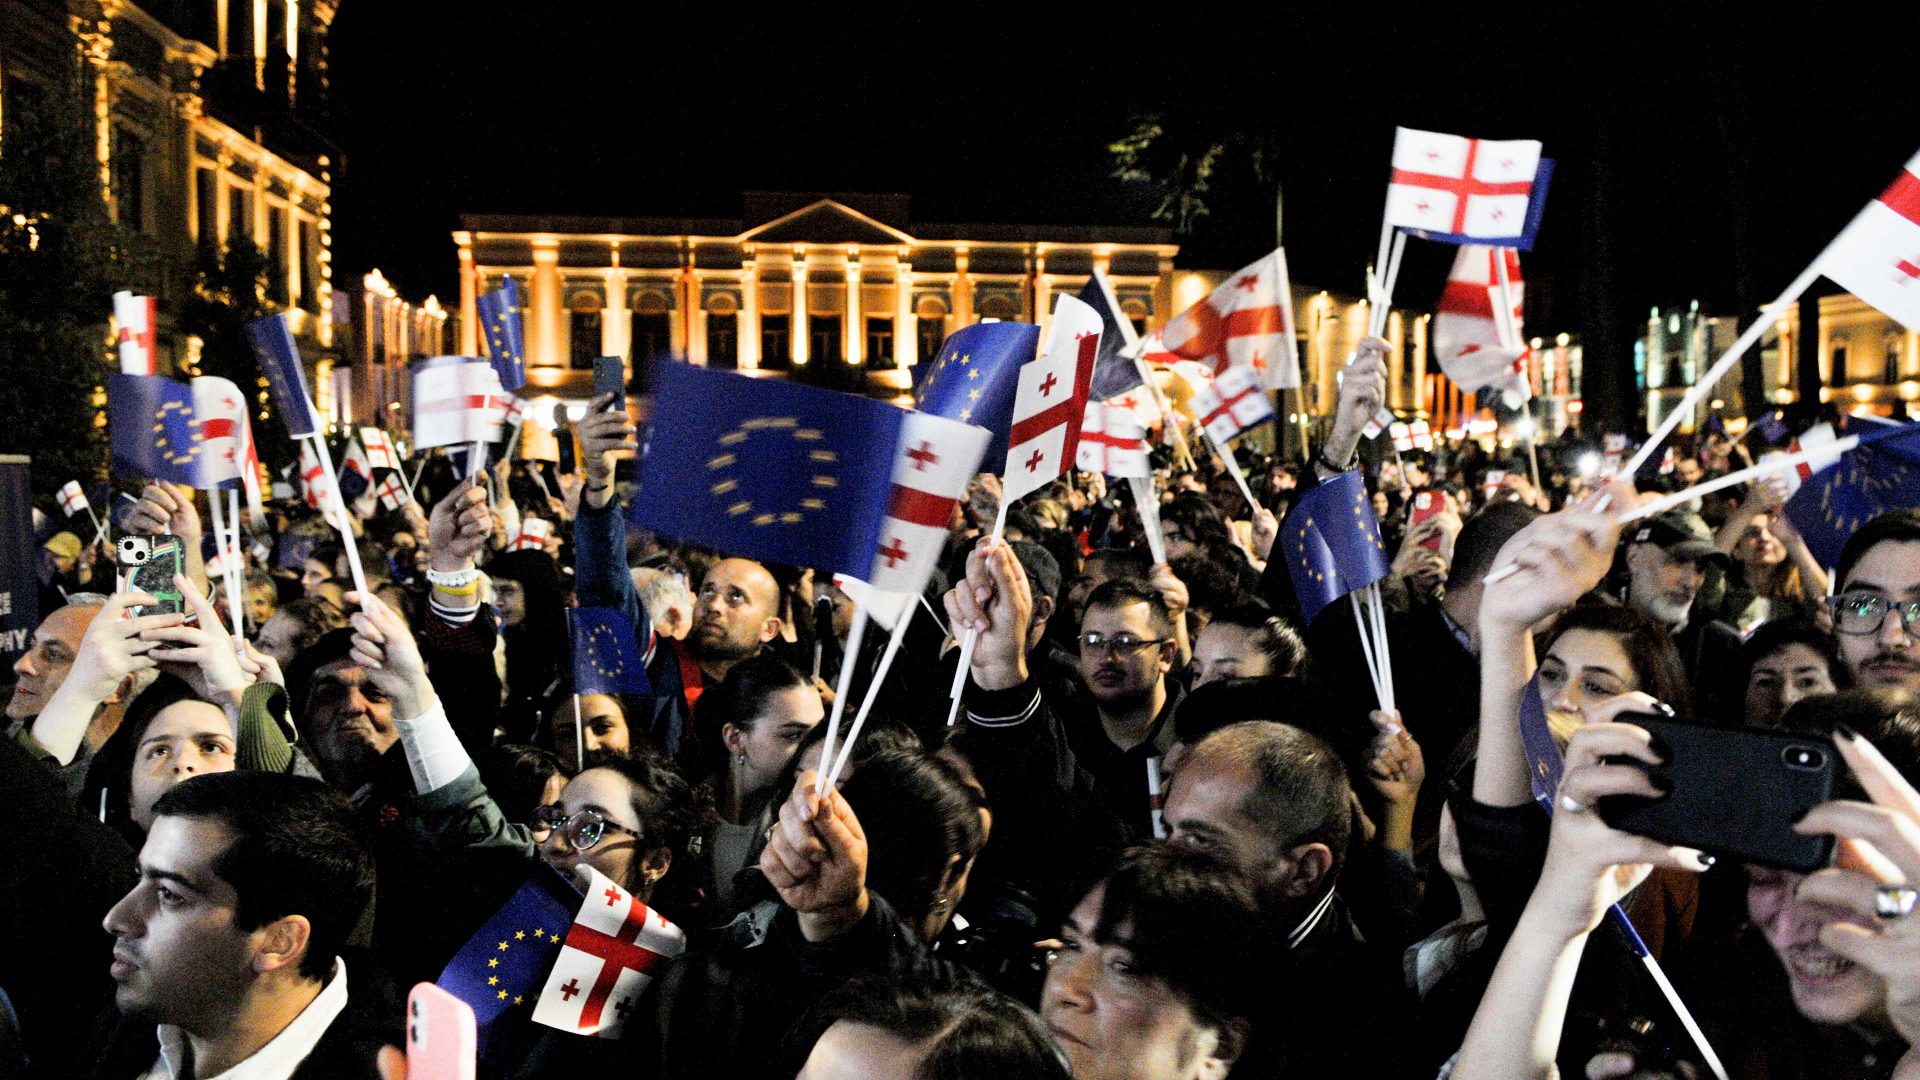 People gather and hold Georgian and European flags in front of the presidential palace celebrating the European Commission decision. Photo: Nicolo Vincenzo Malvestuto/Getty Images